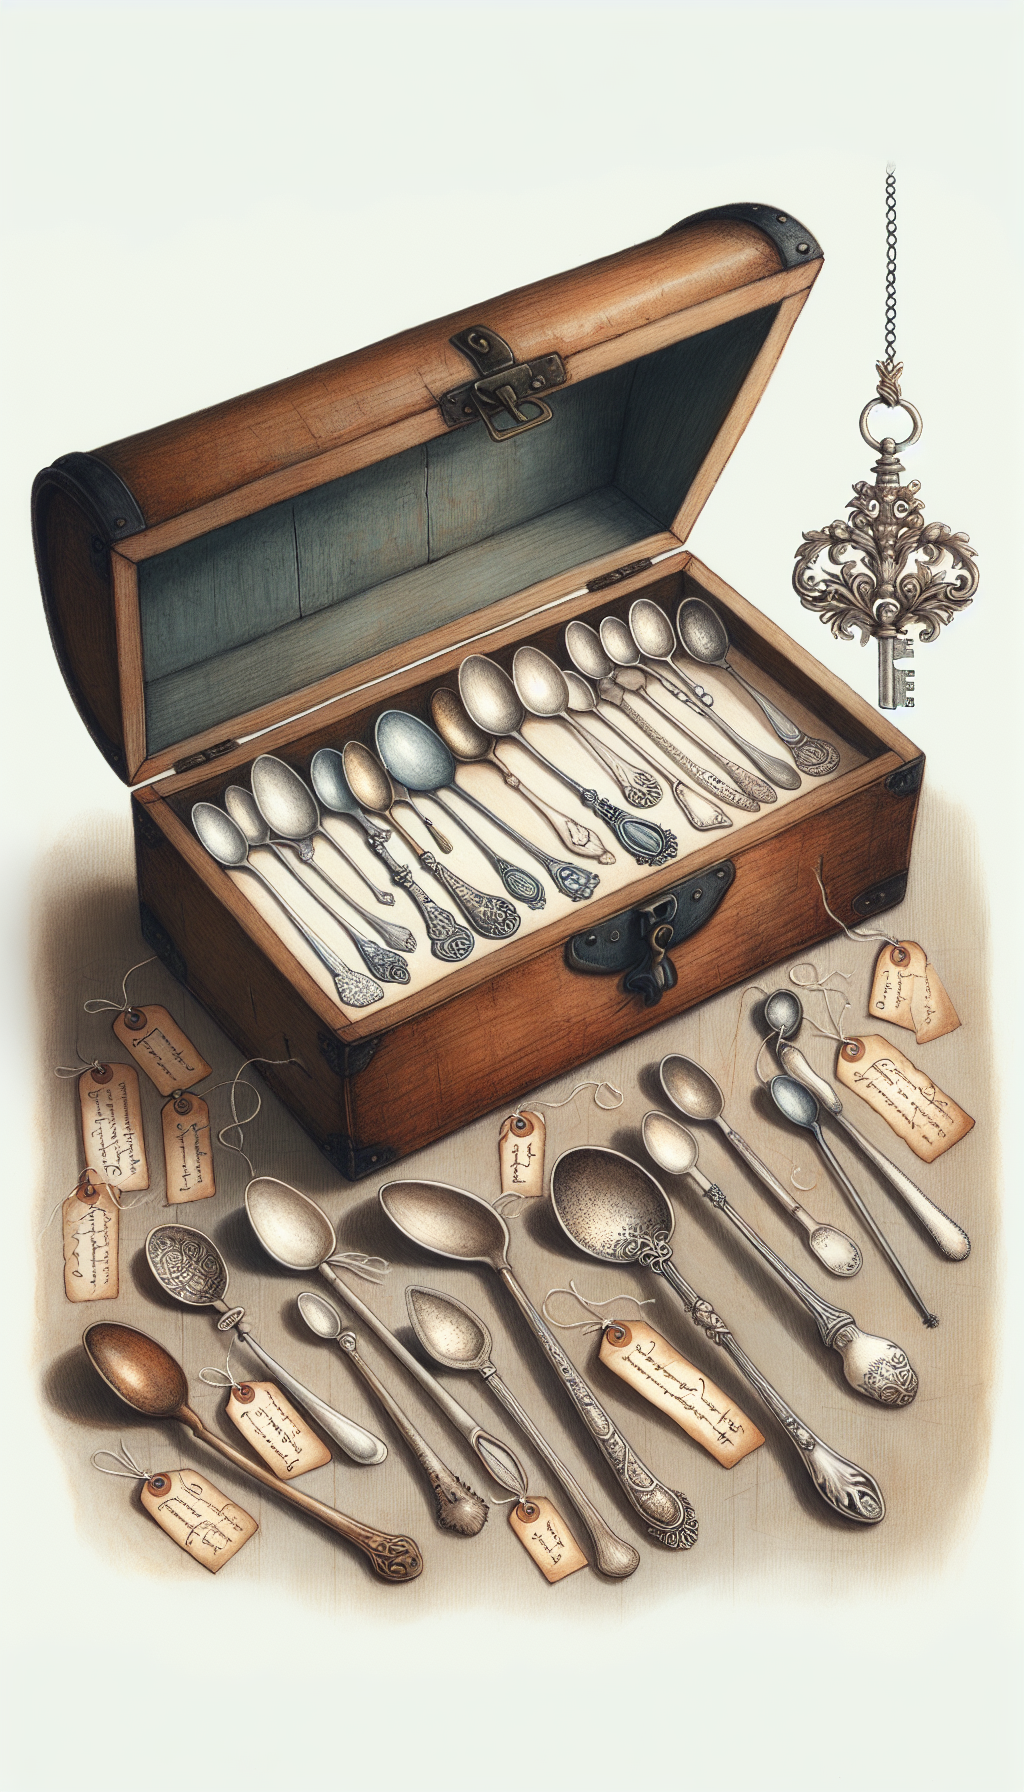 A whimsical, aged wooden treasure chest, slightly ajar, with a collection of illustrated antique spoons—ranging from a Baroque stylus to a Rococo soup spoon—spilling out, each tagged with a small parchment identifying its era. Overhead, an ornate, decorative key dangles from a fine chain, hinting at the secrets unlocked within this beginner's guide to historical spoon identification.